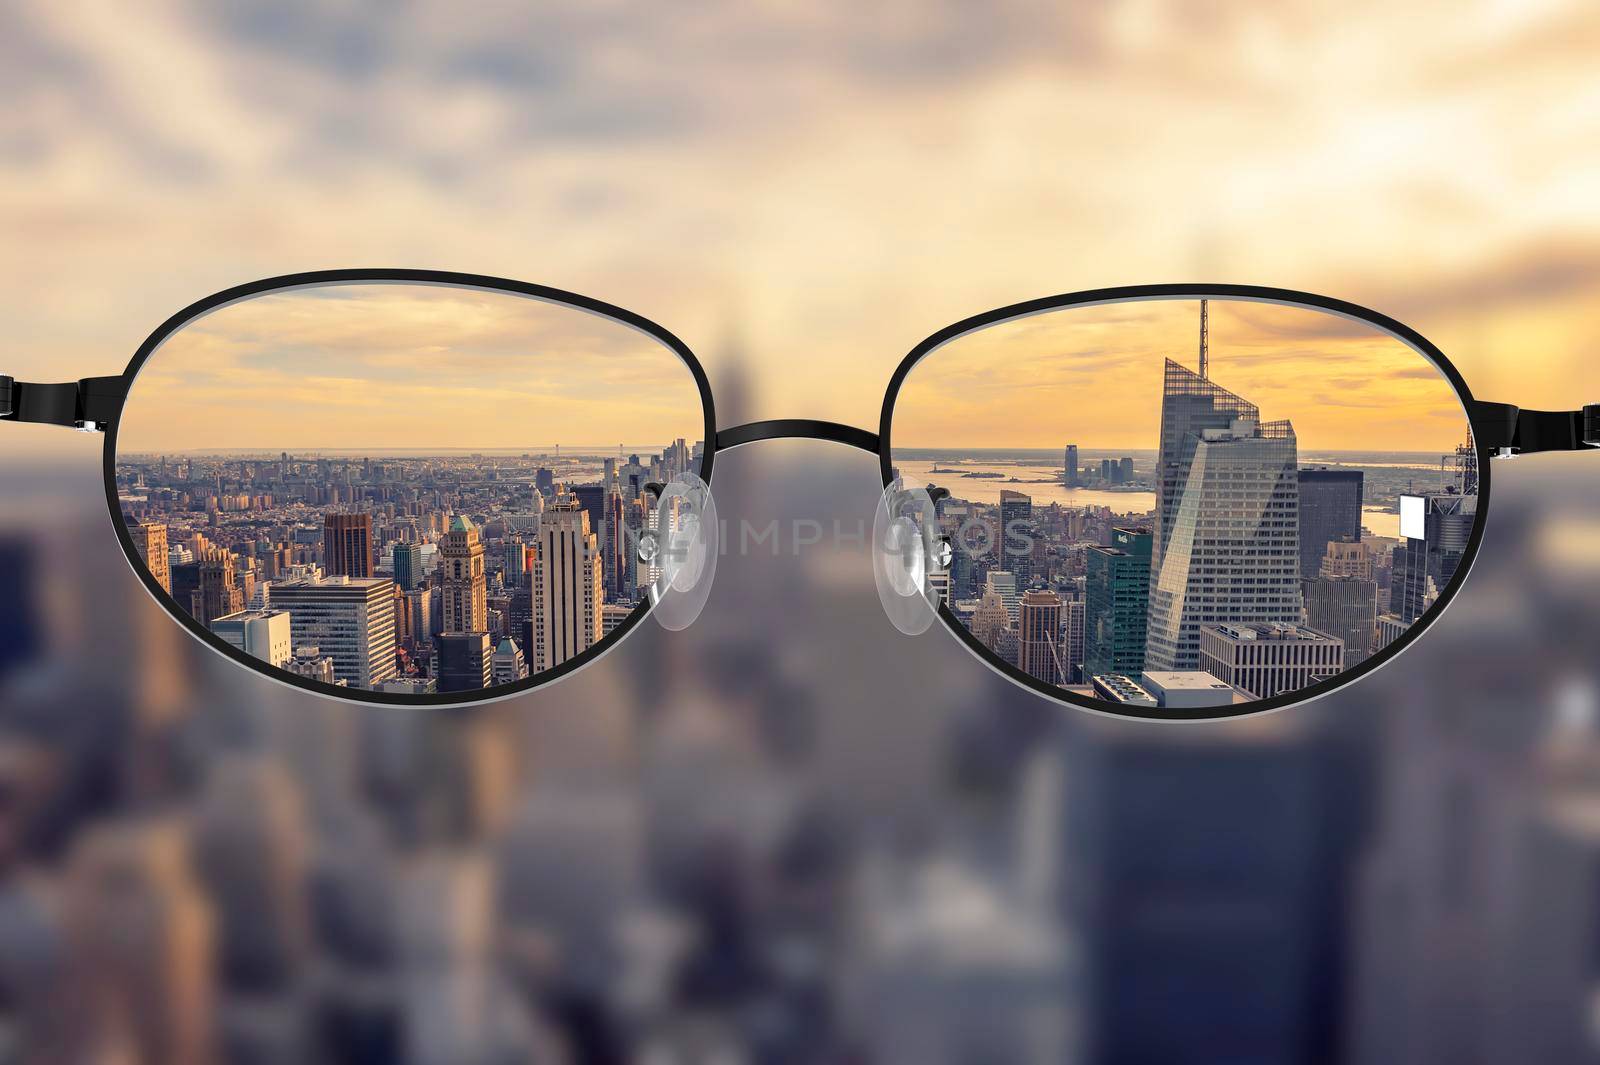 Clear cityscape focused in glasses lenses by cla78